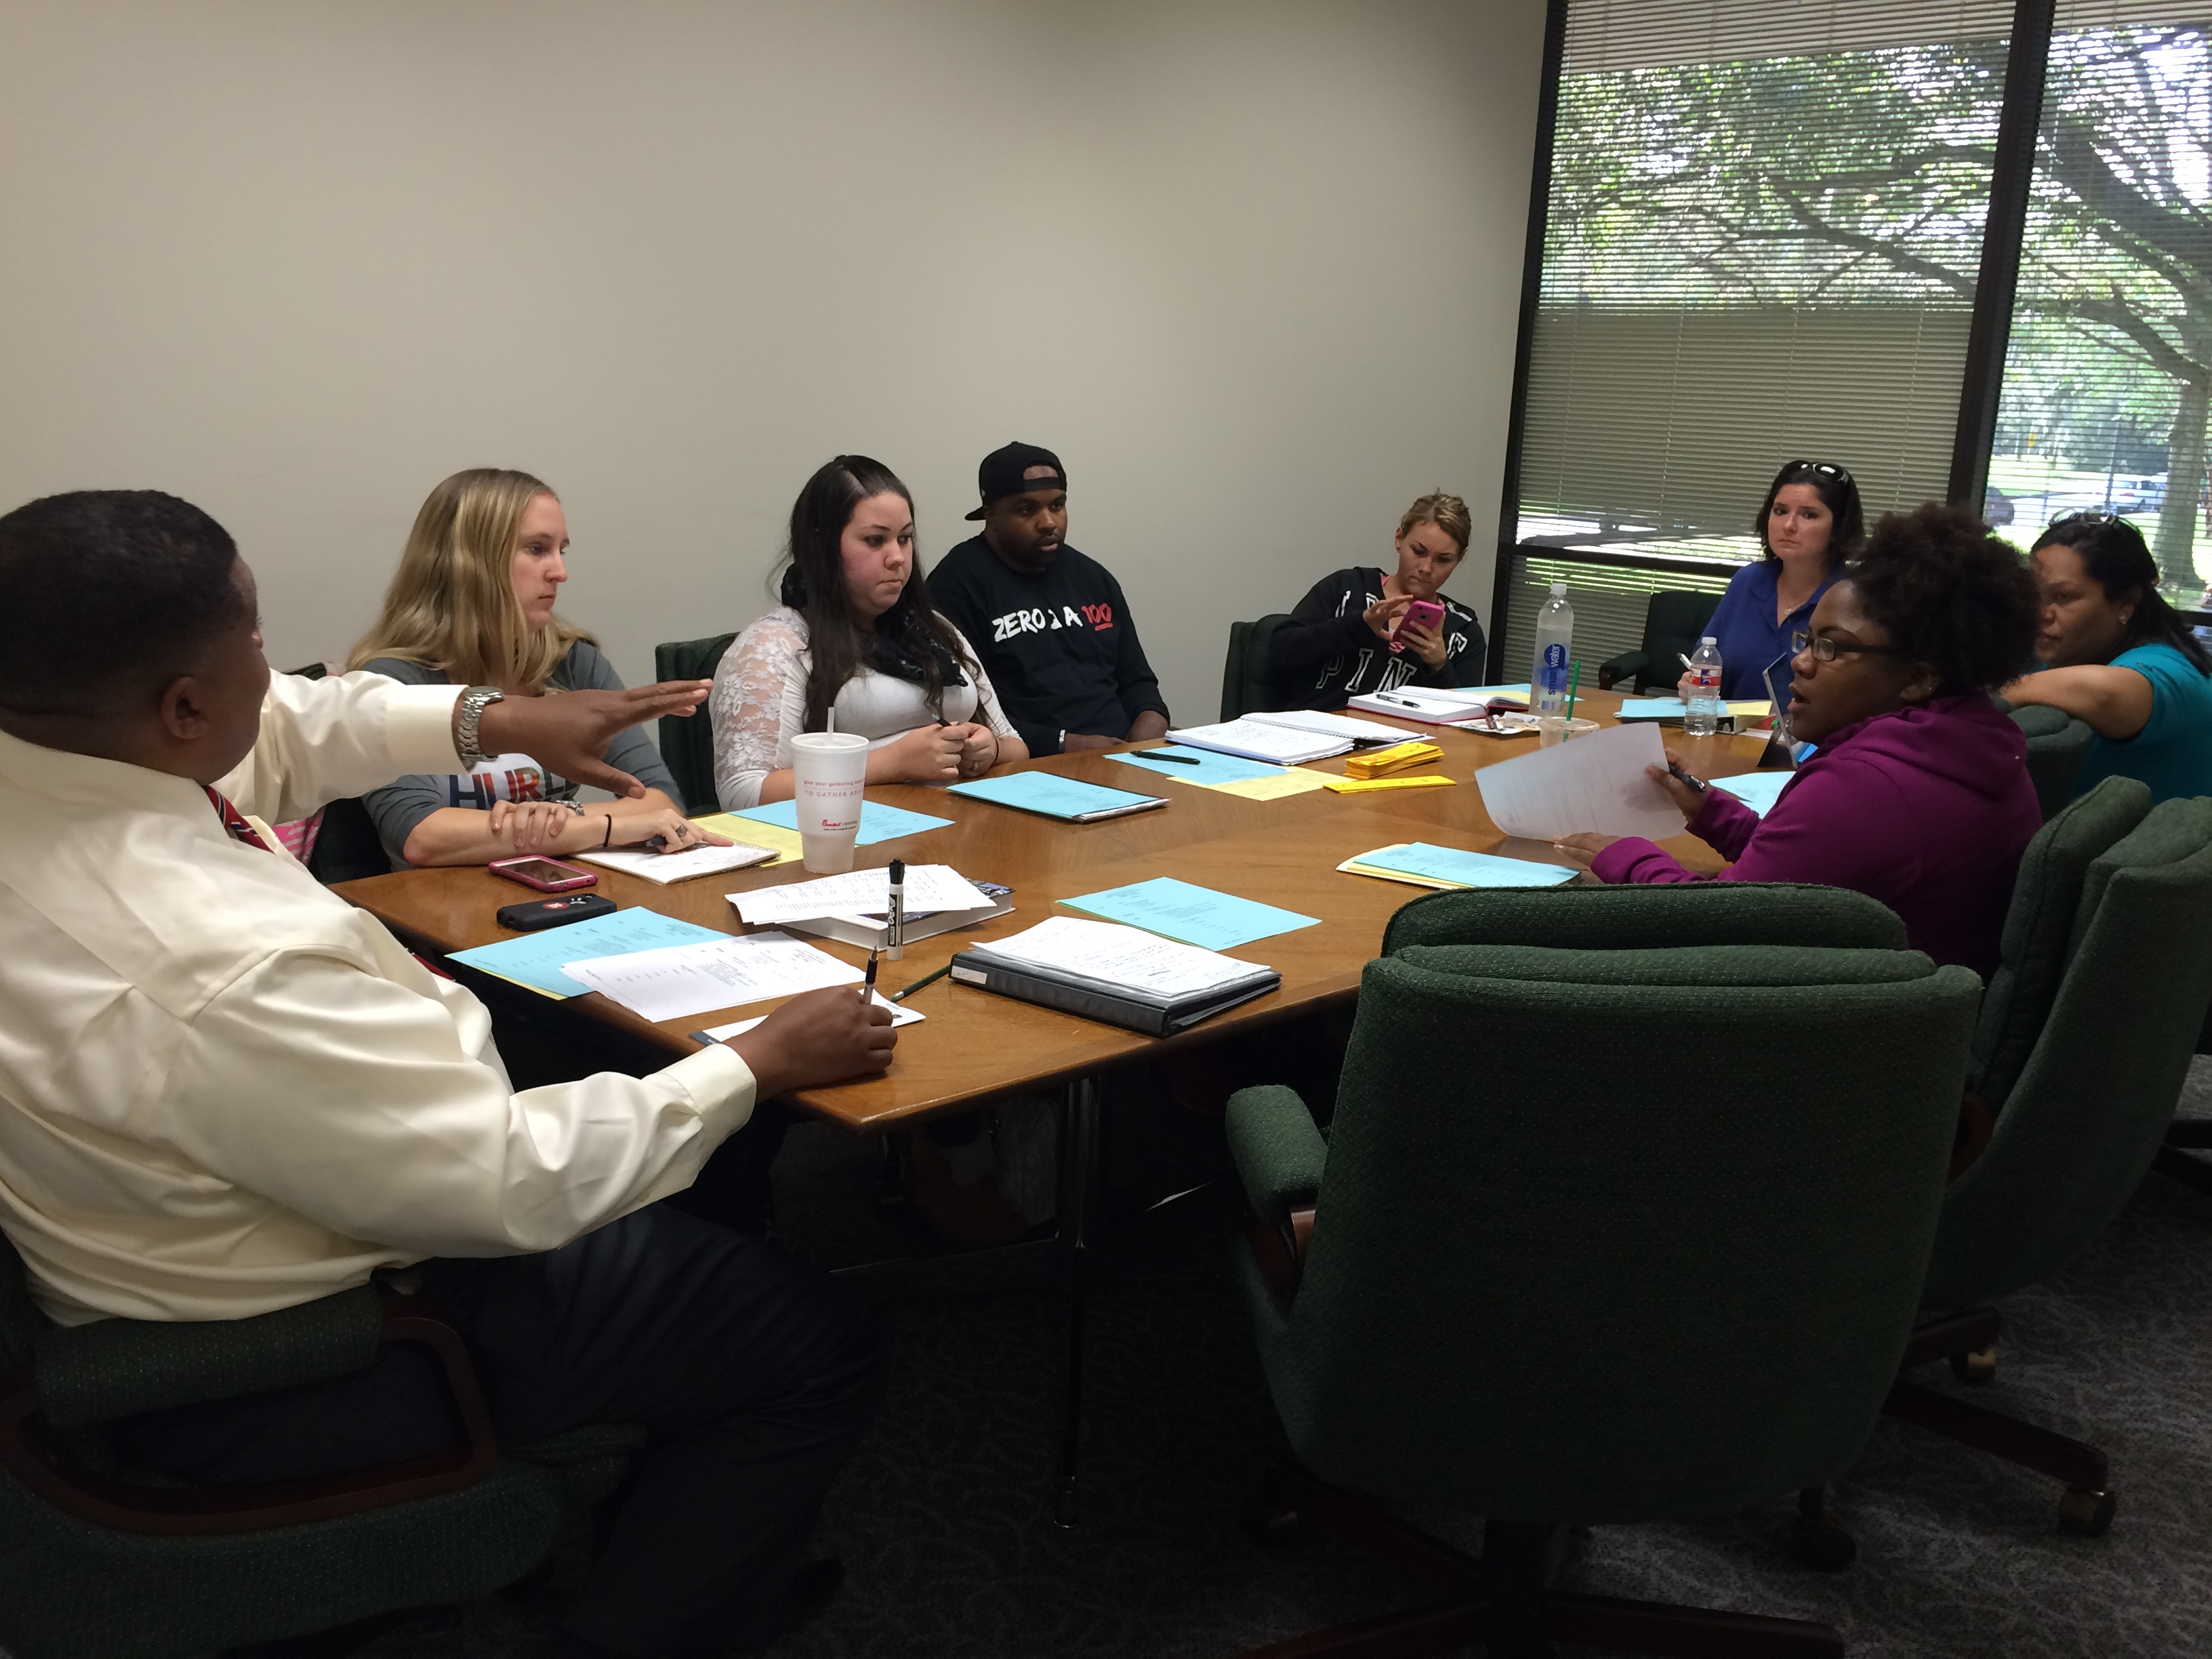 Image: Everette Penn, TAPS (Teen and Police Service) co-founder and UHCL professor of criminology, discusses upcoming objectives with UHCL student volunteers during a TAPS meeting Monday, Nov. 1, 2015. Photo by The Signal reporter Lana Donath.